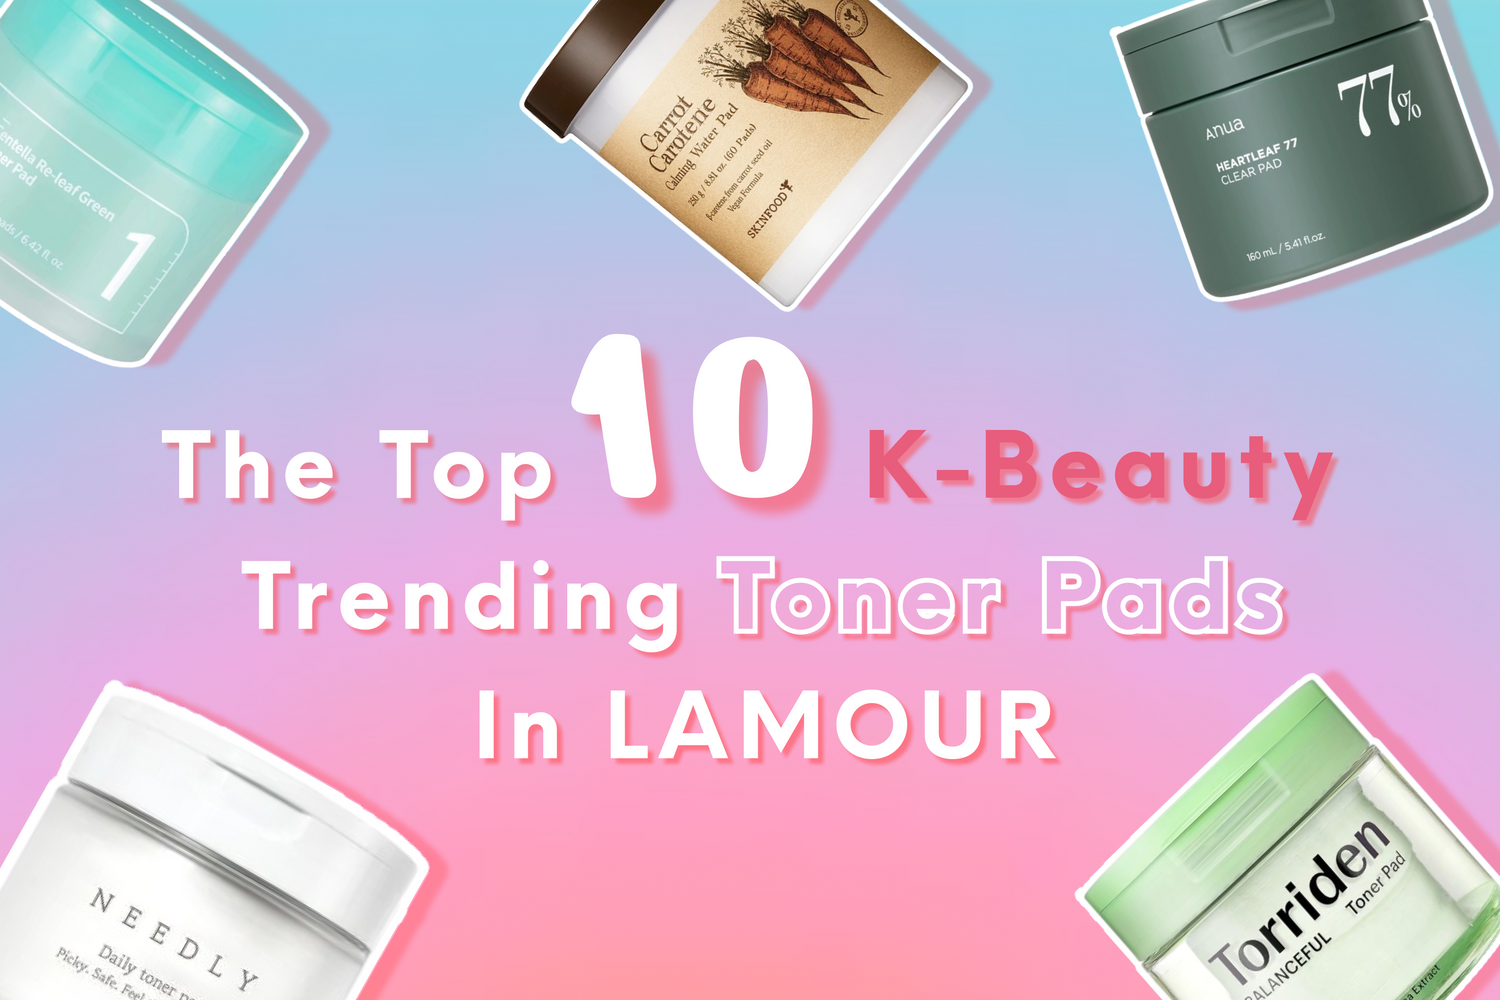 Get the K-Beauty Glow: The Top 10 Trending Toner pads in LAMOUR